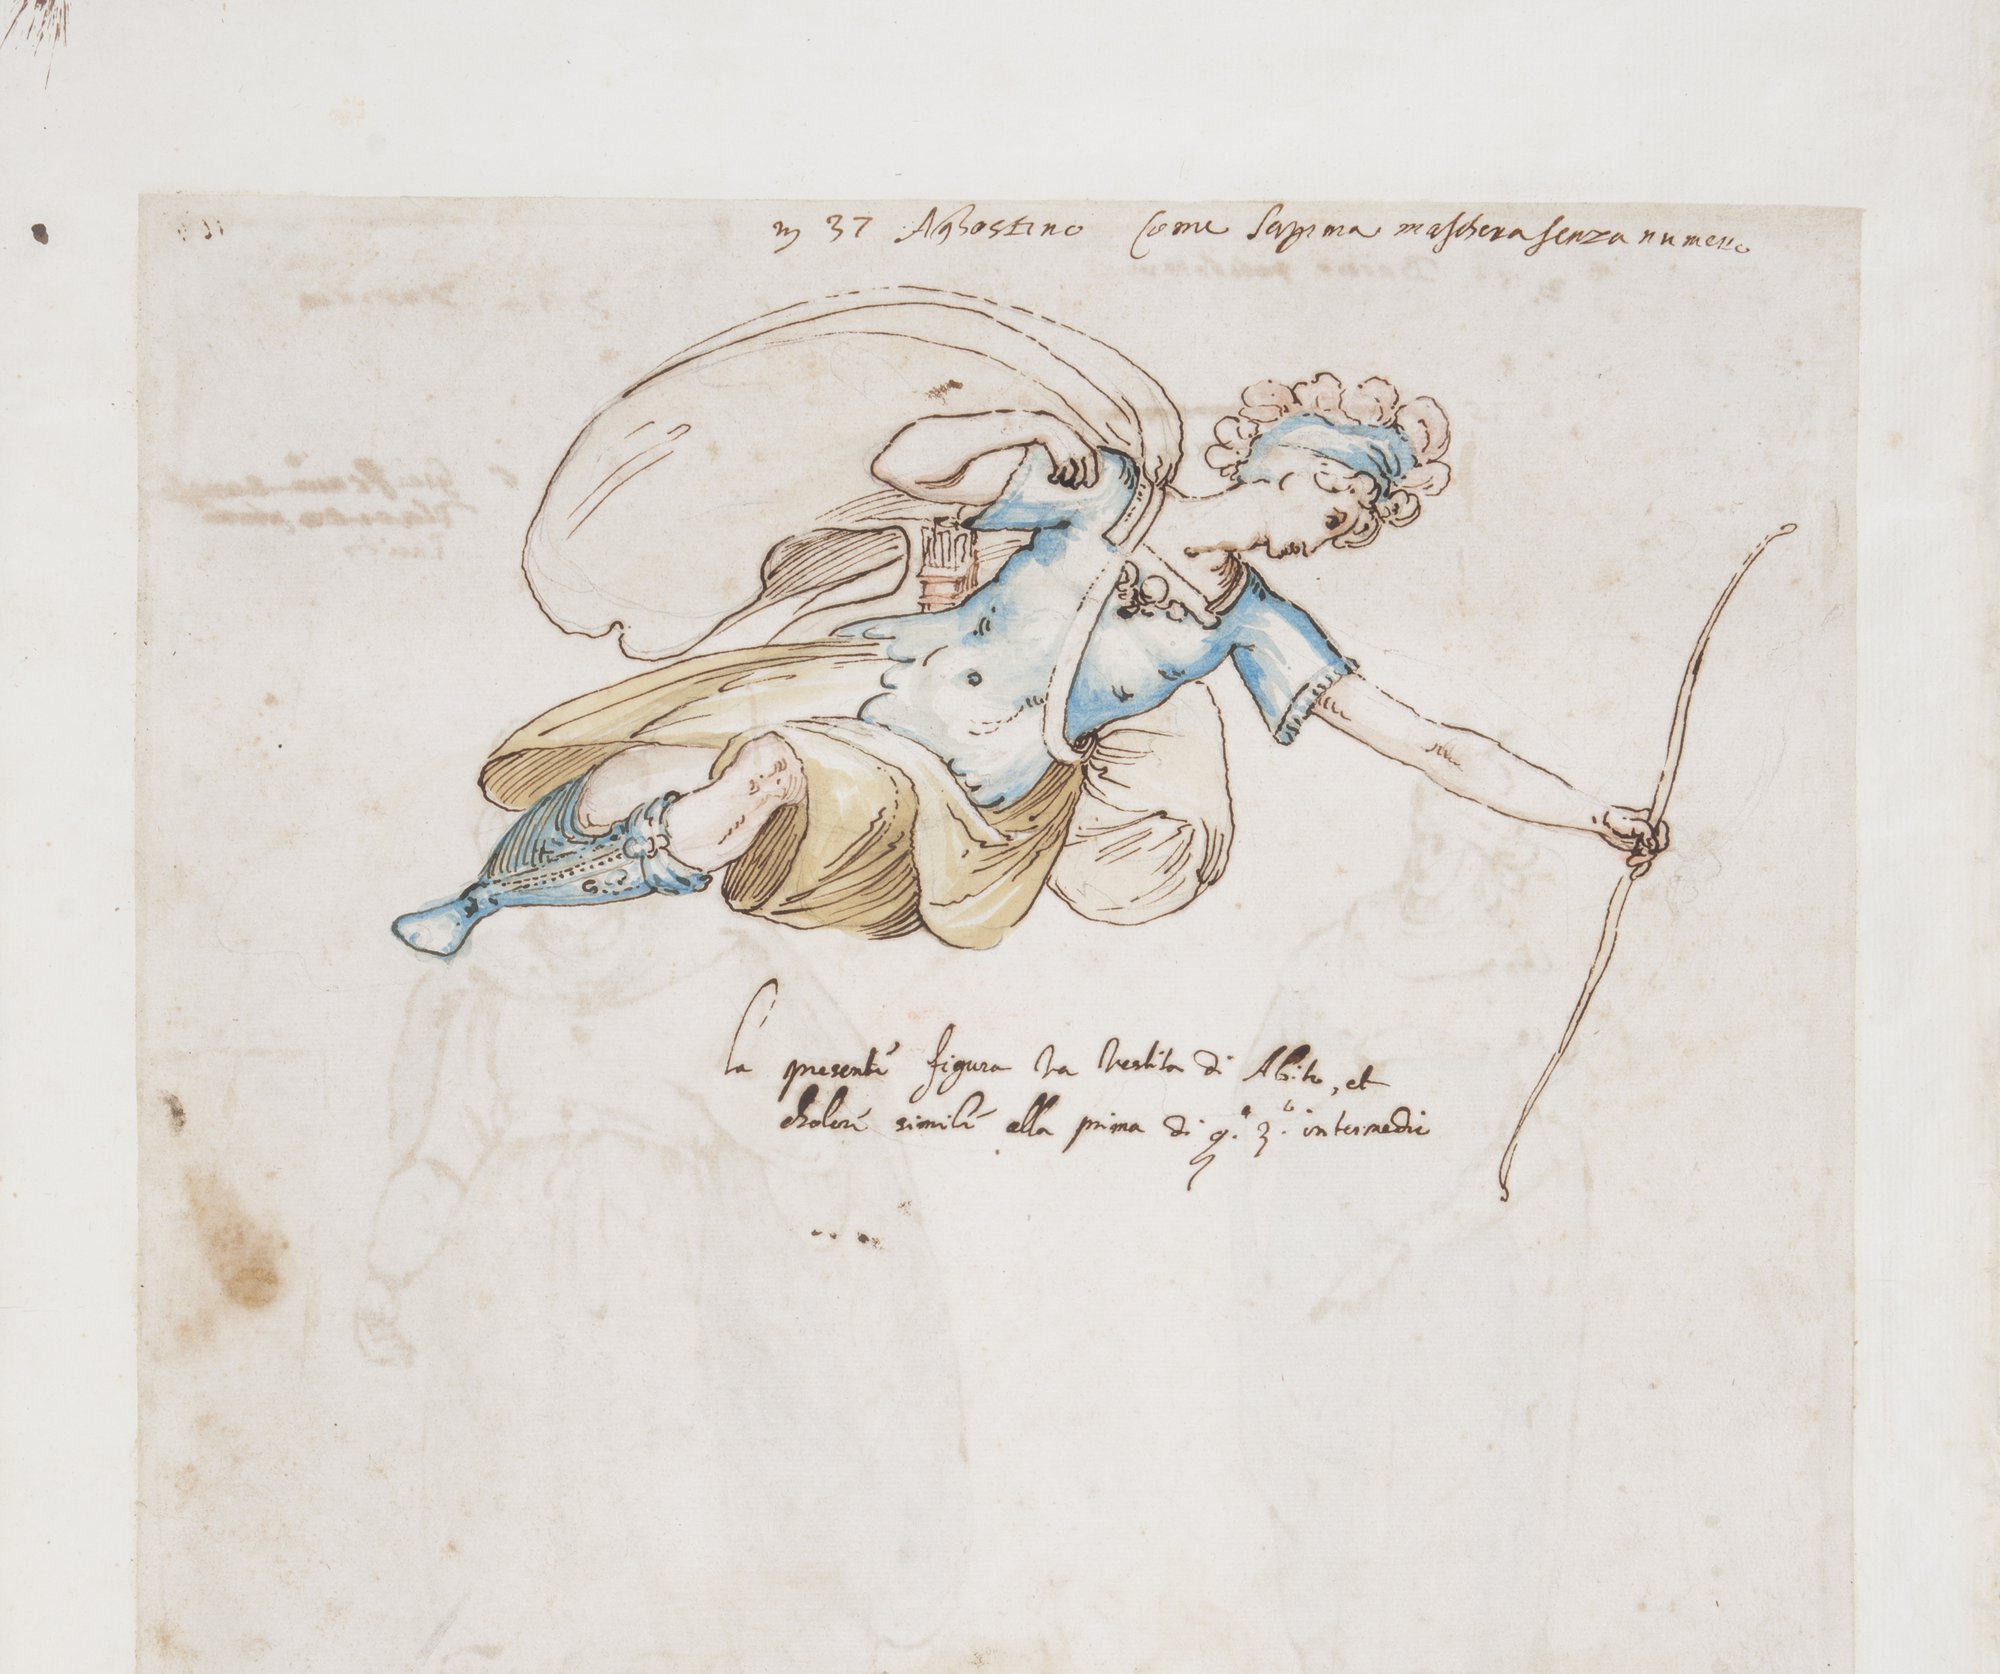 Drawing of one of the original costumes from the first production of Jacobo Peri and Ottavio Rinuccini’s La Dafne opera, 1598.